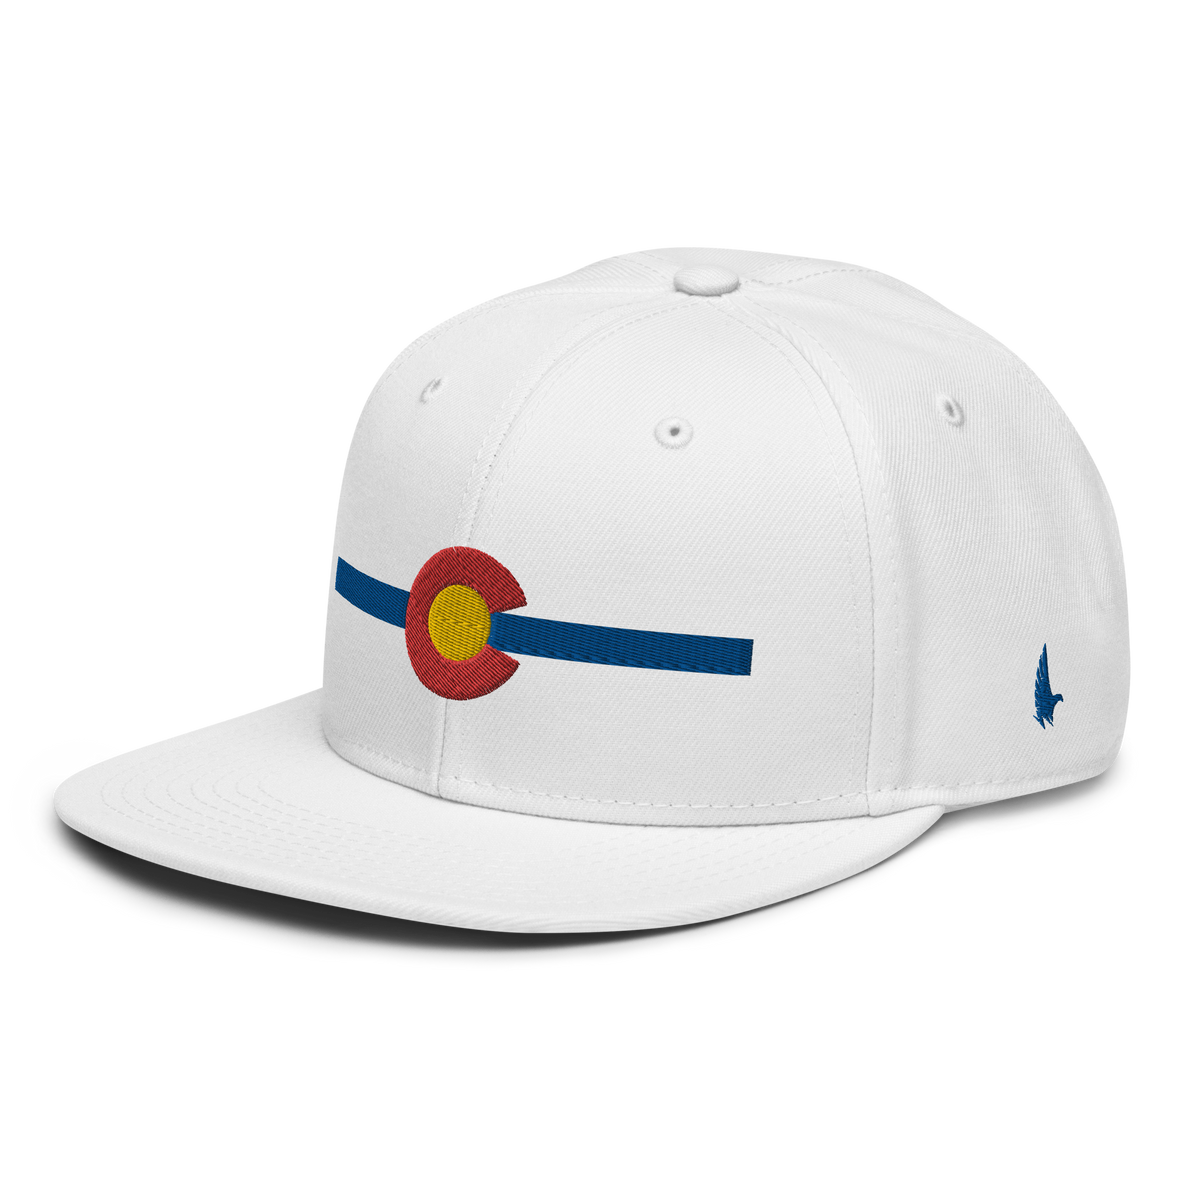 Classic Colorado Snapback Hat White Blue OS - Loyalty Vibes